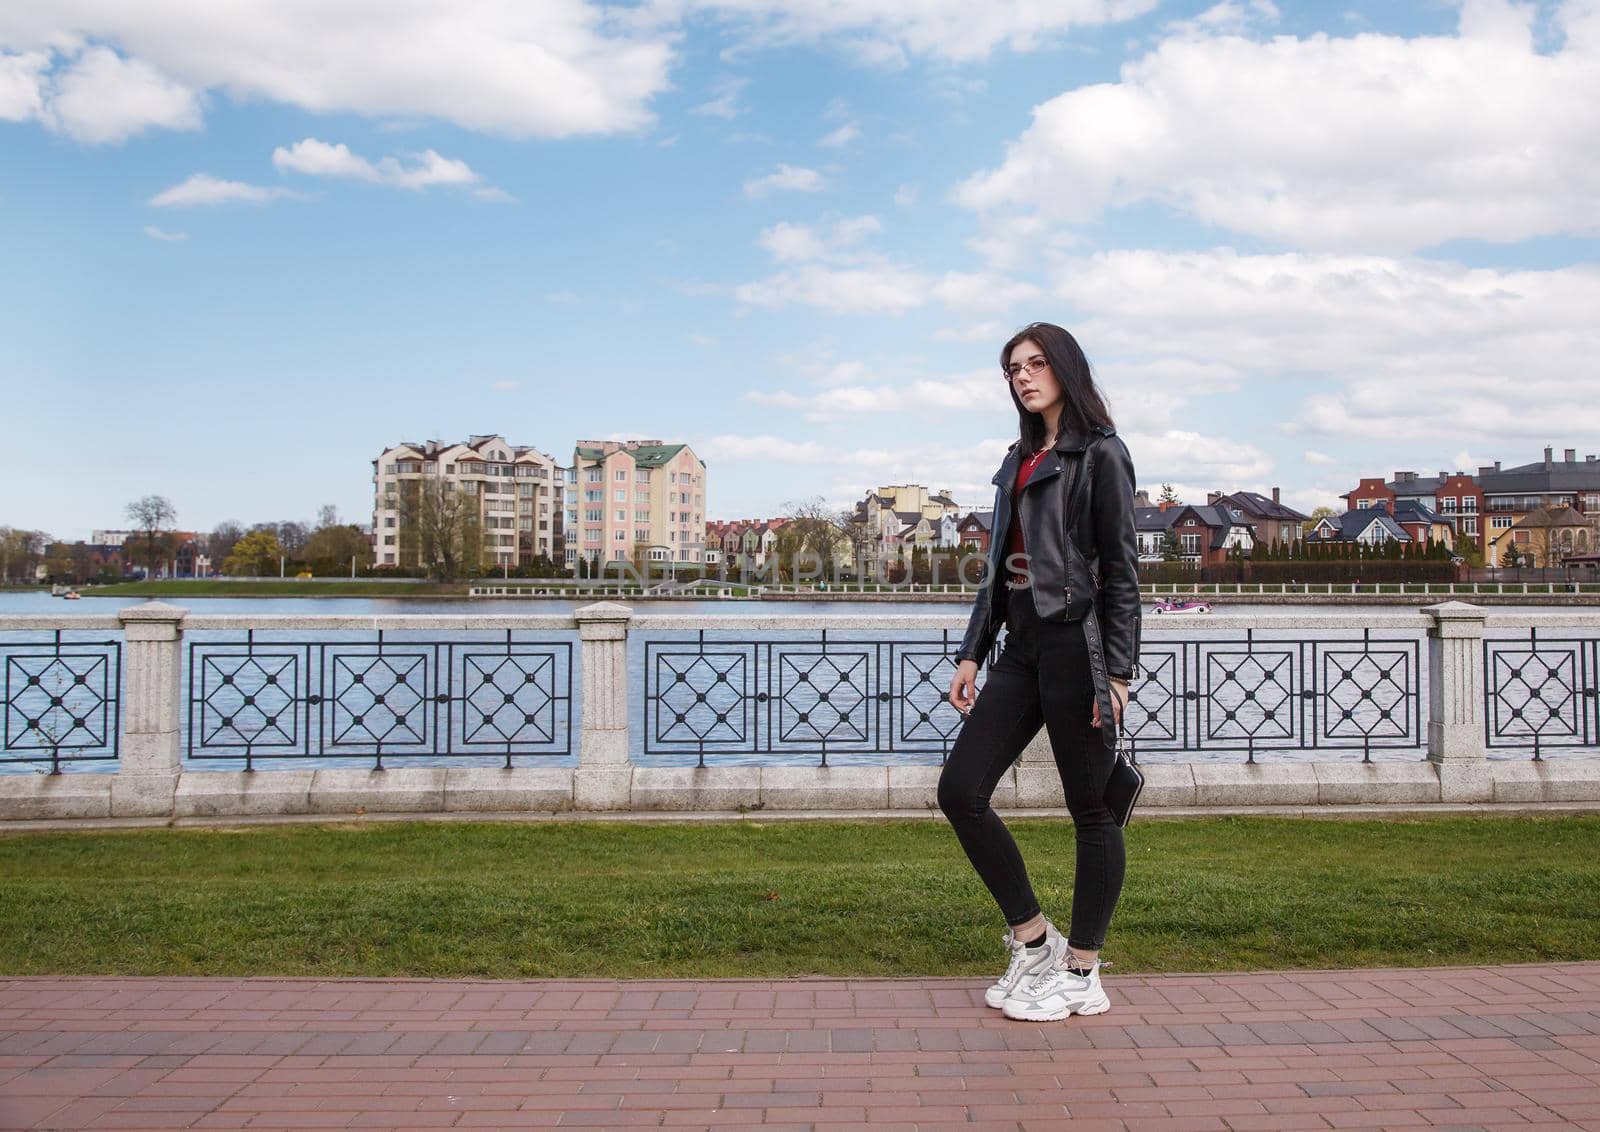 young girl stands on the embankment near lake in city park by raddnatt